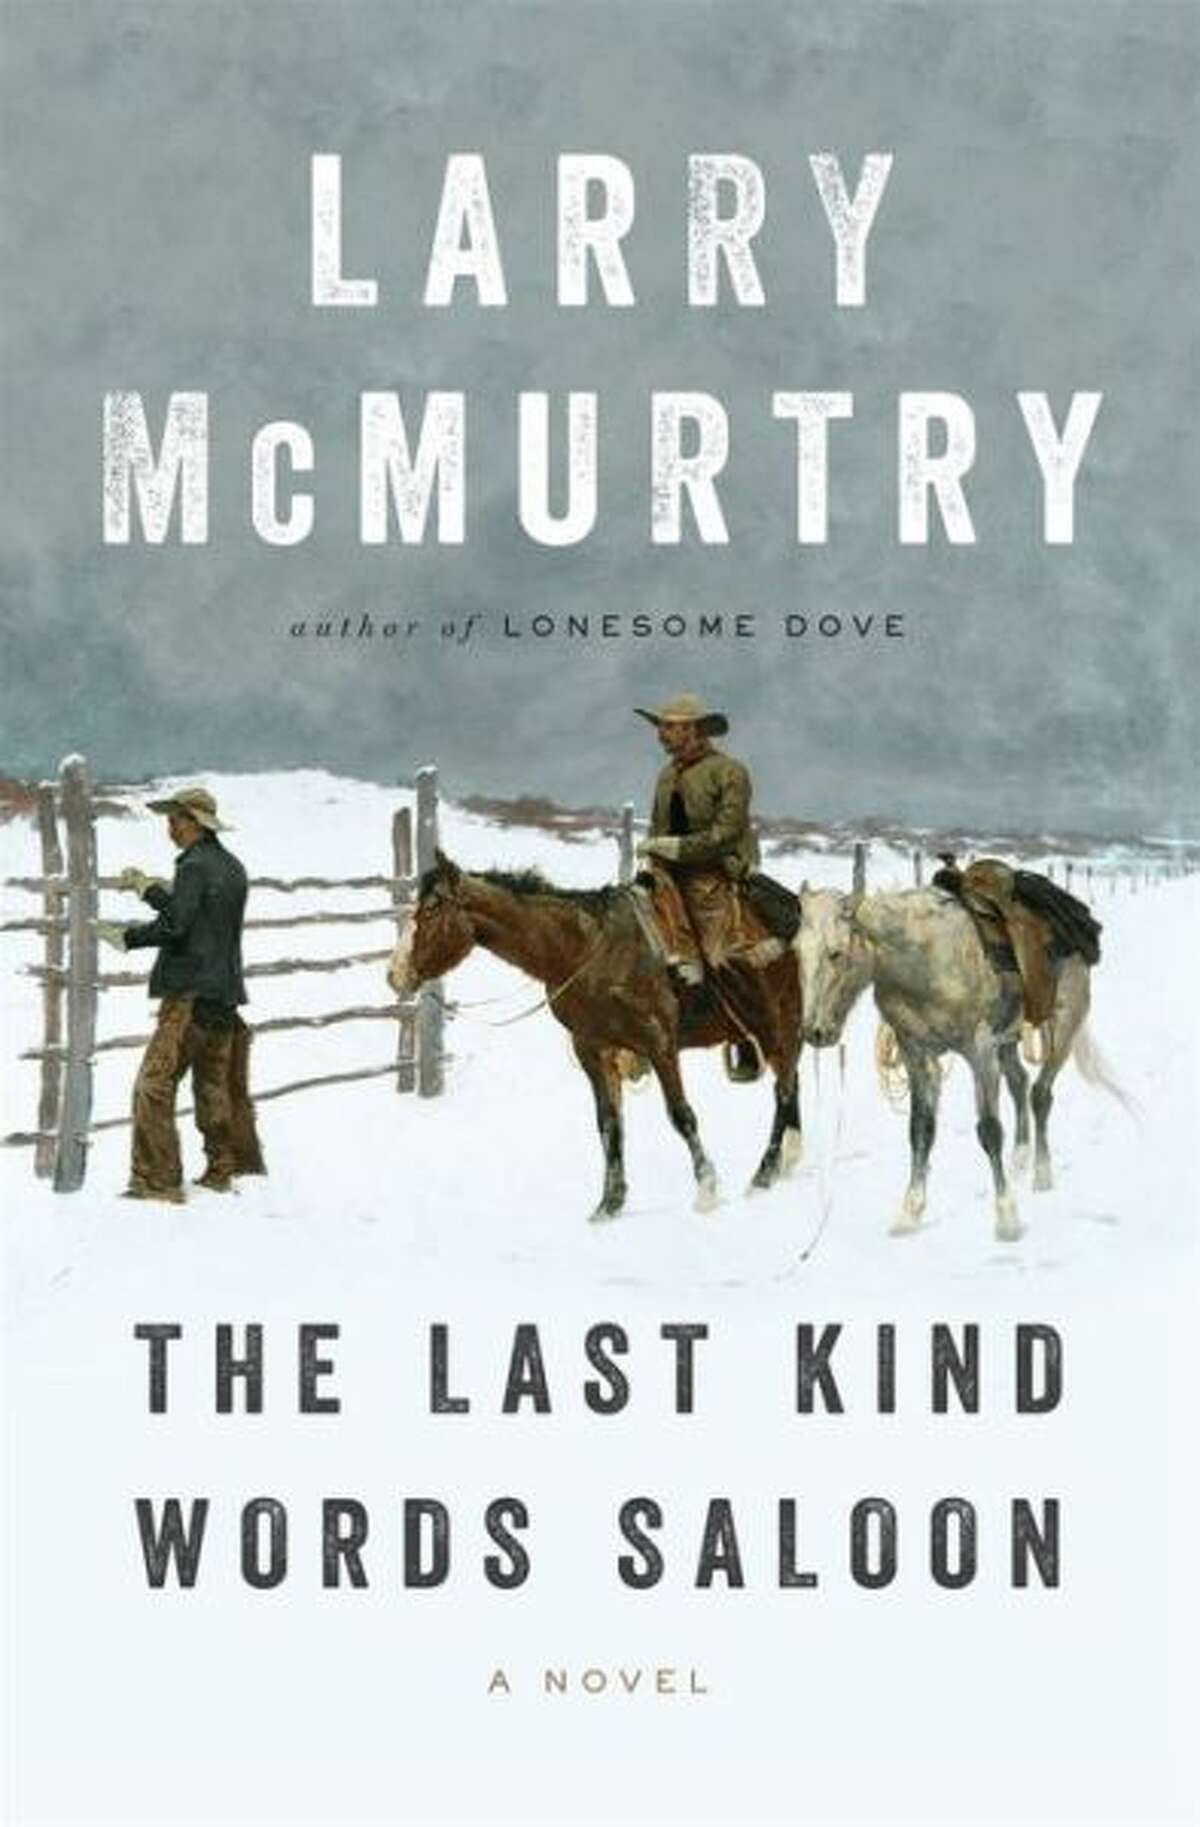 “The Last Kind Words Saloon,” a novel by Larry McMurtry, follows Sheriff Wyatt Earp and his friend Doc Holliday as they travel to Tombstone, Ariz.